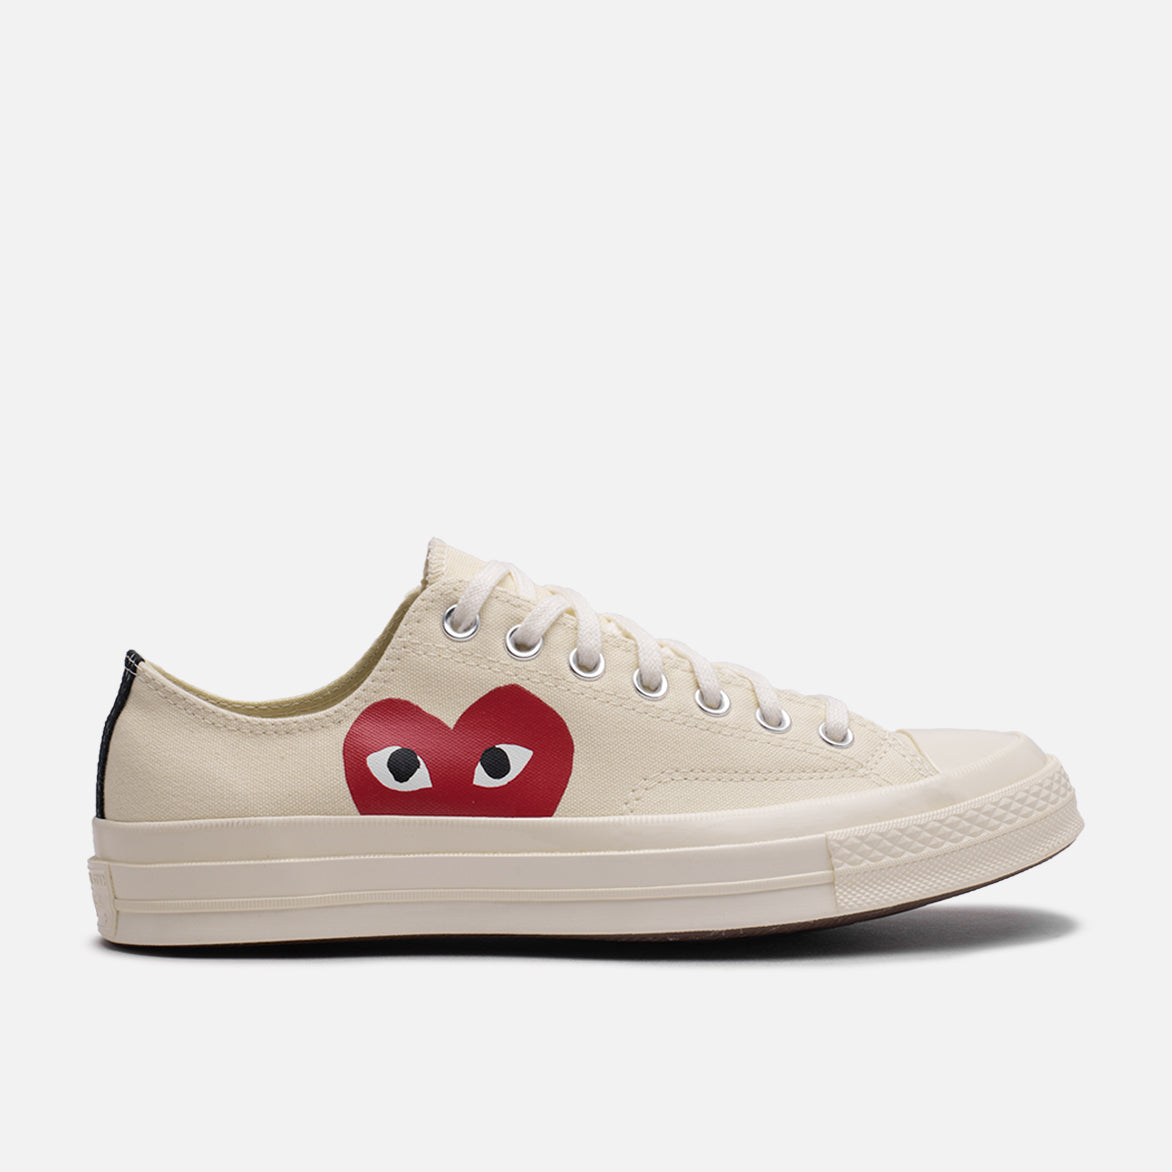 CDG PLAY X CONVERSE CHUCK TAYLOR ALL STAR '70 OX - | lapstoneandhammer.com